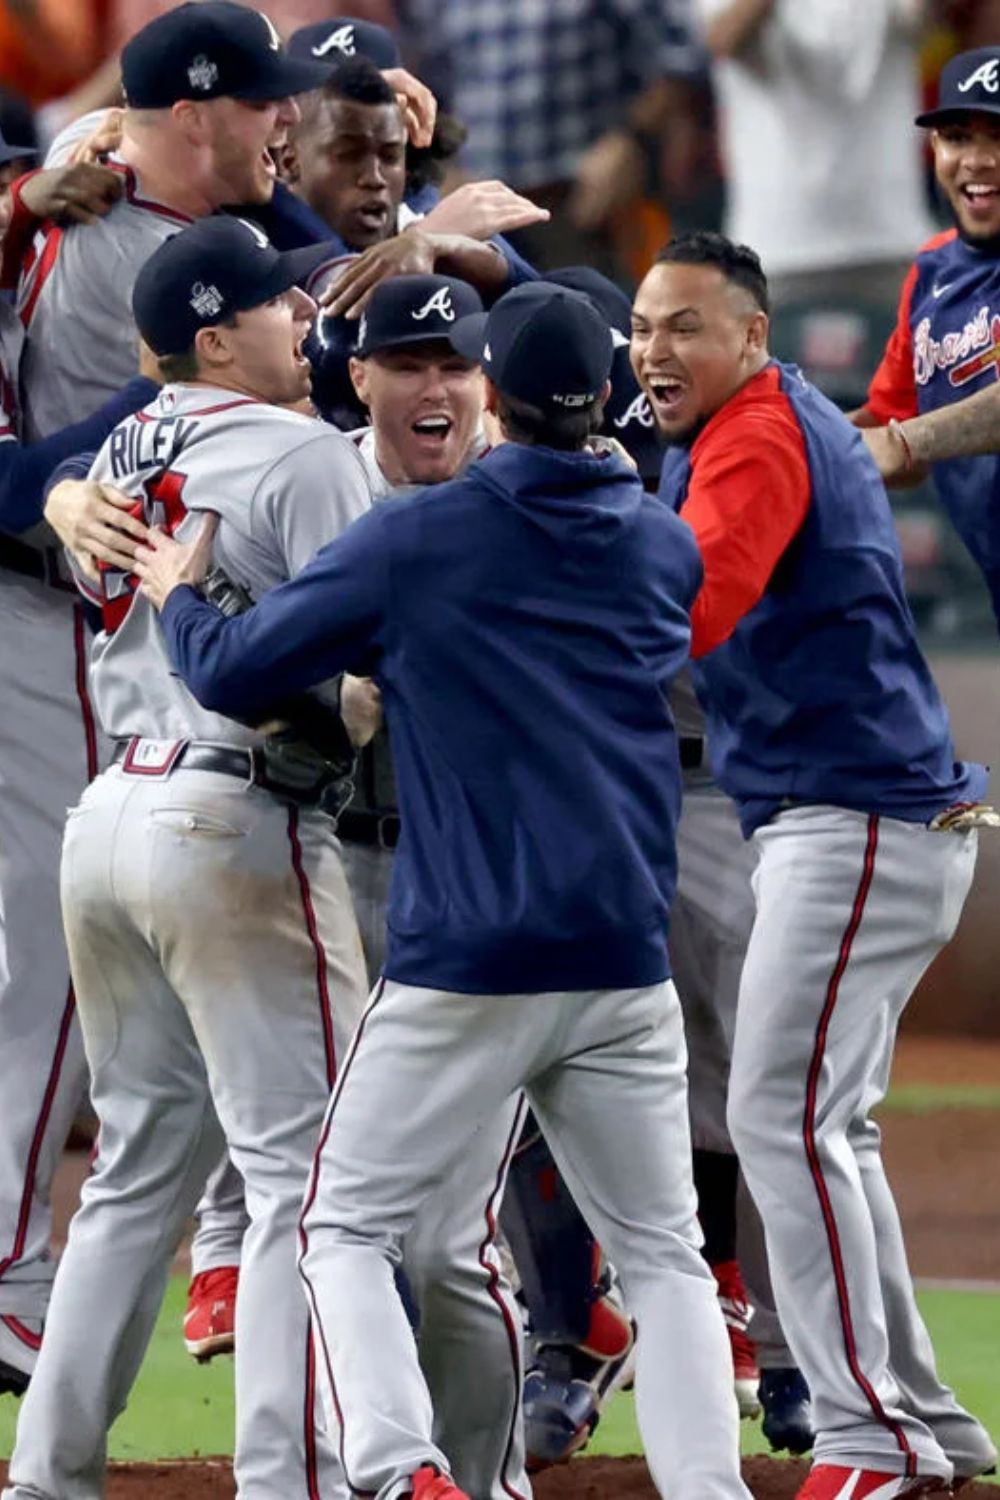 The Atlanta Braves Celebrates Their Win After 26 Years